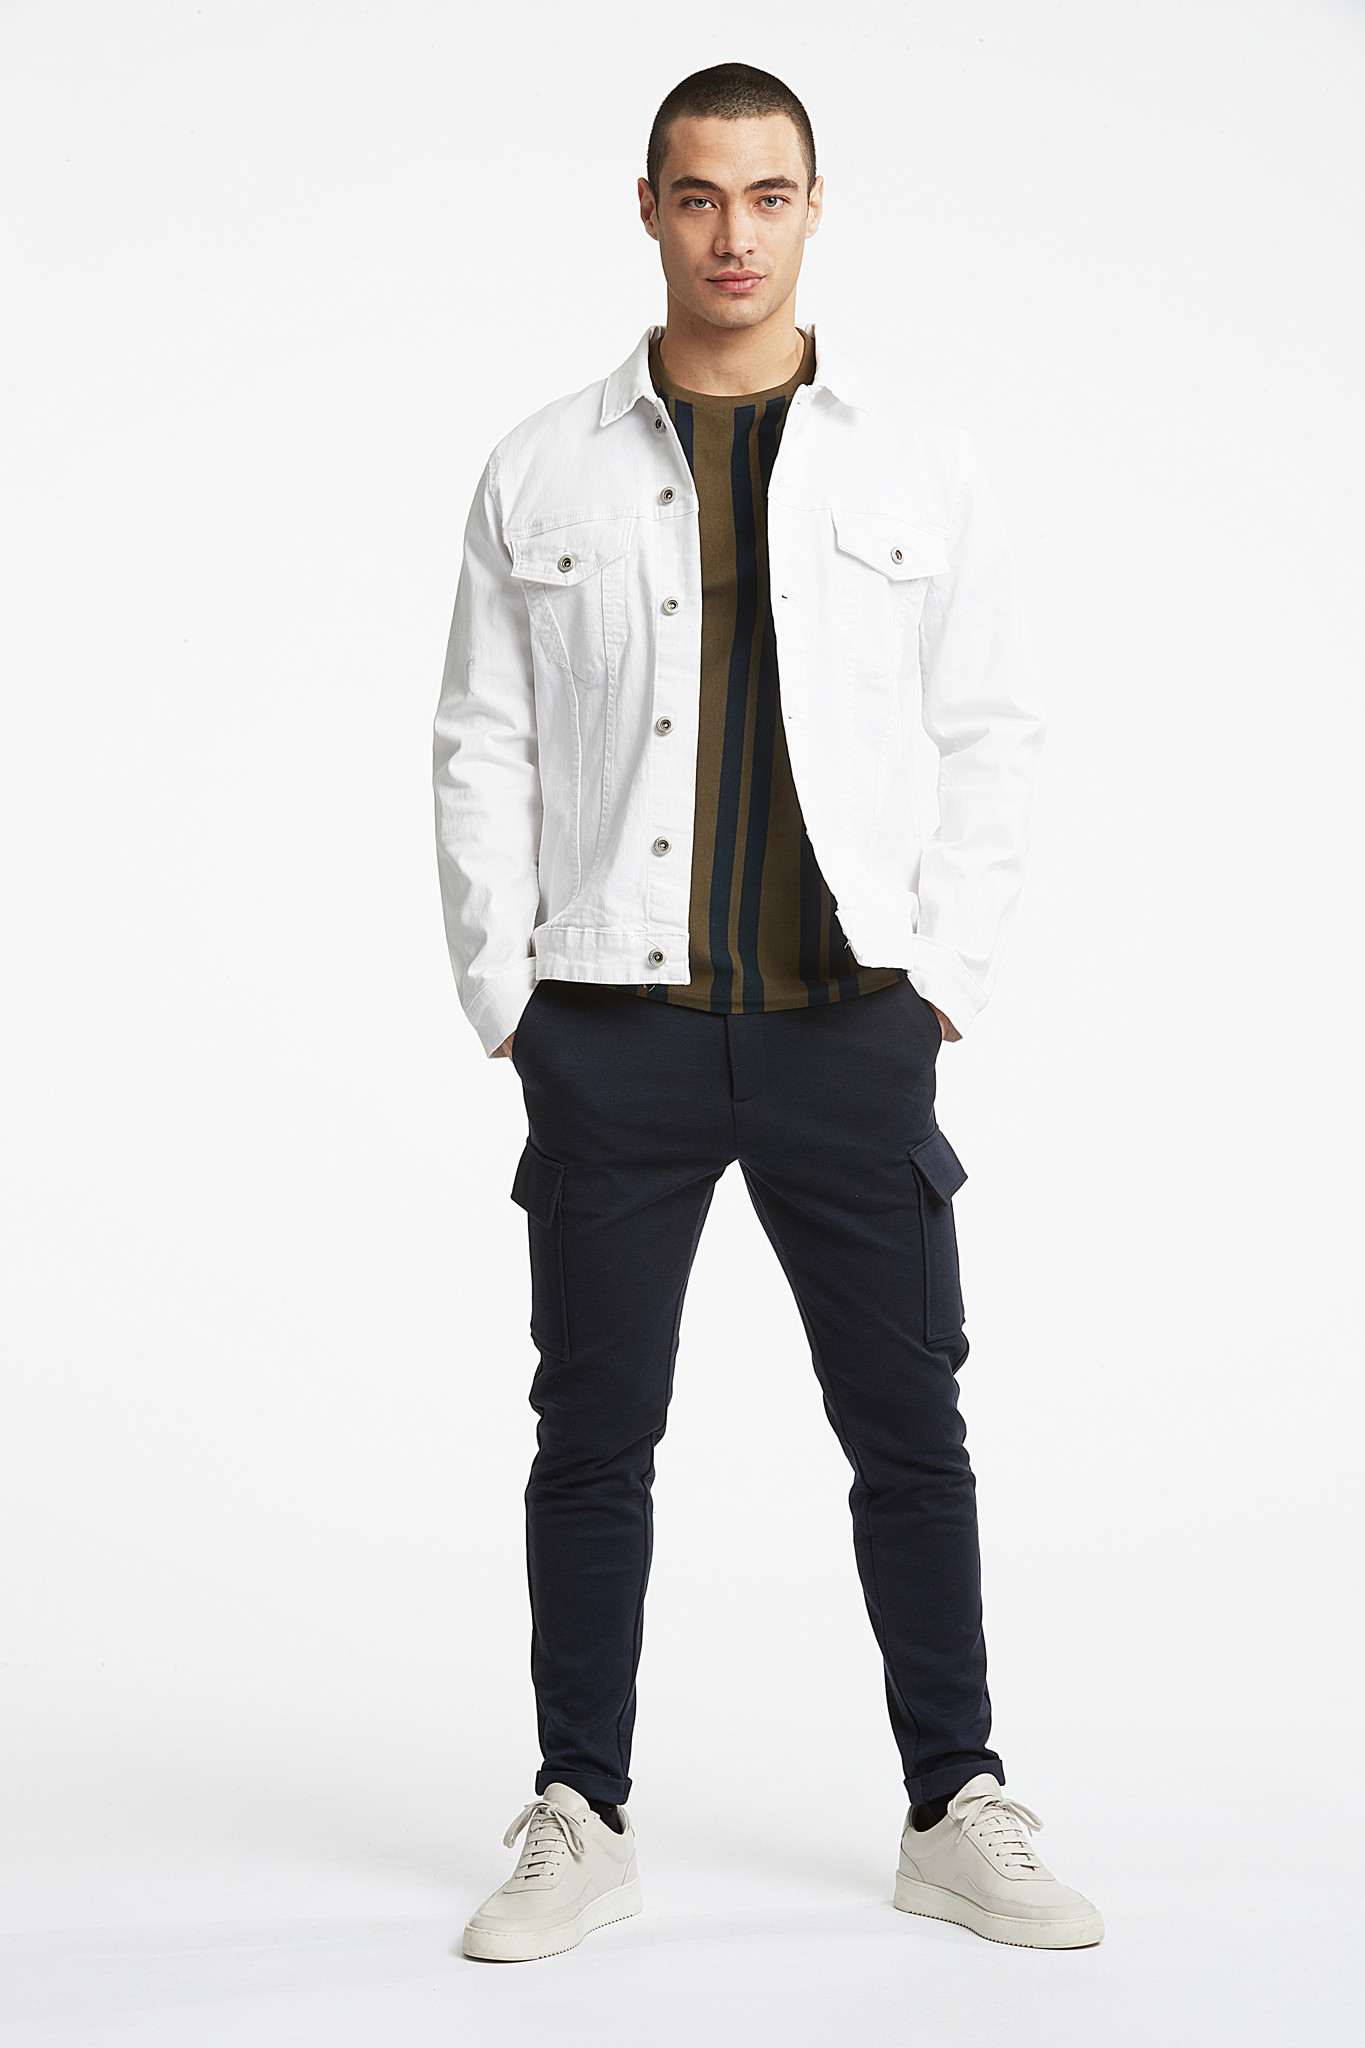 HOLZWEILER W. Apollo Denim Jacket - 139.50 €. Buy Denim jackets from  HOLZWEILER online at Boozt.com. Fast delivery and easy returns